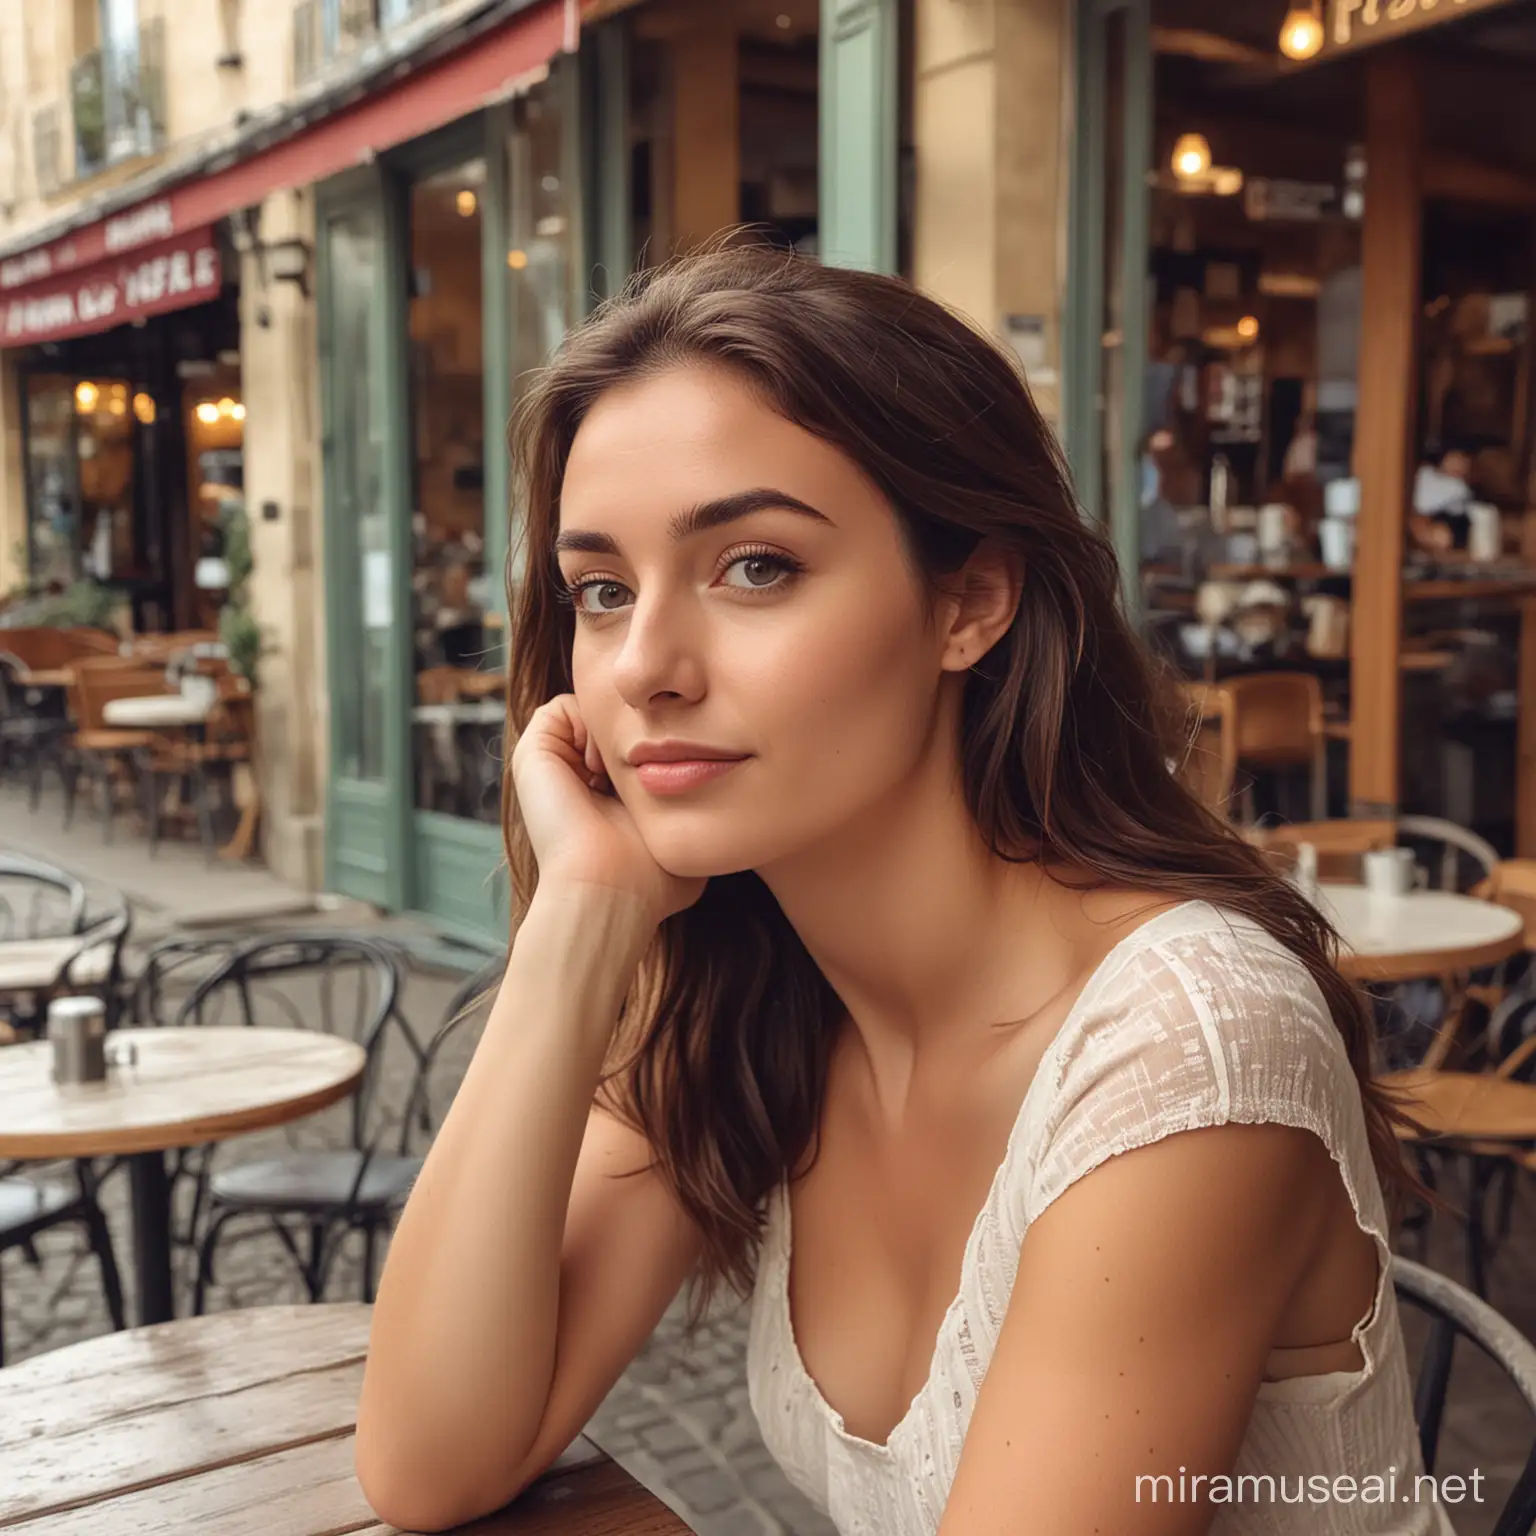 Beautiful Woman Enjoying Coffee at a Charming French Cafe